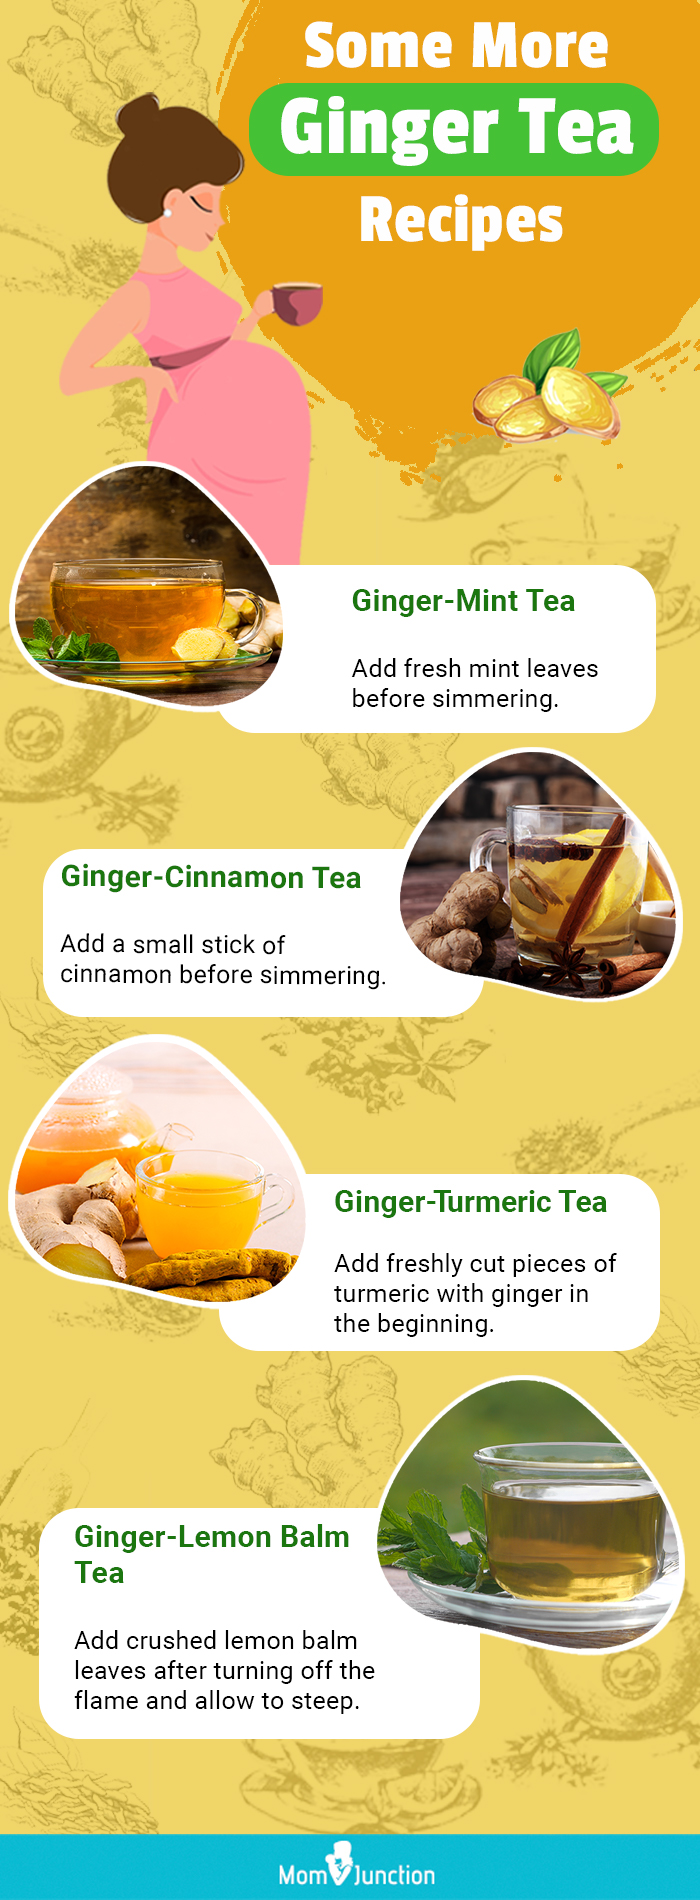 ginger tea recipes (infographic)